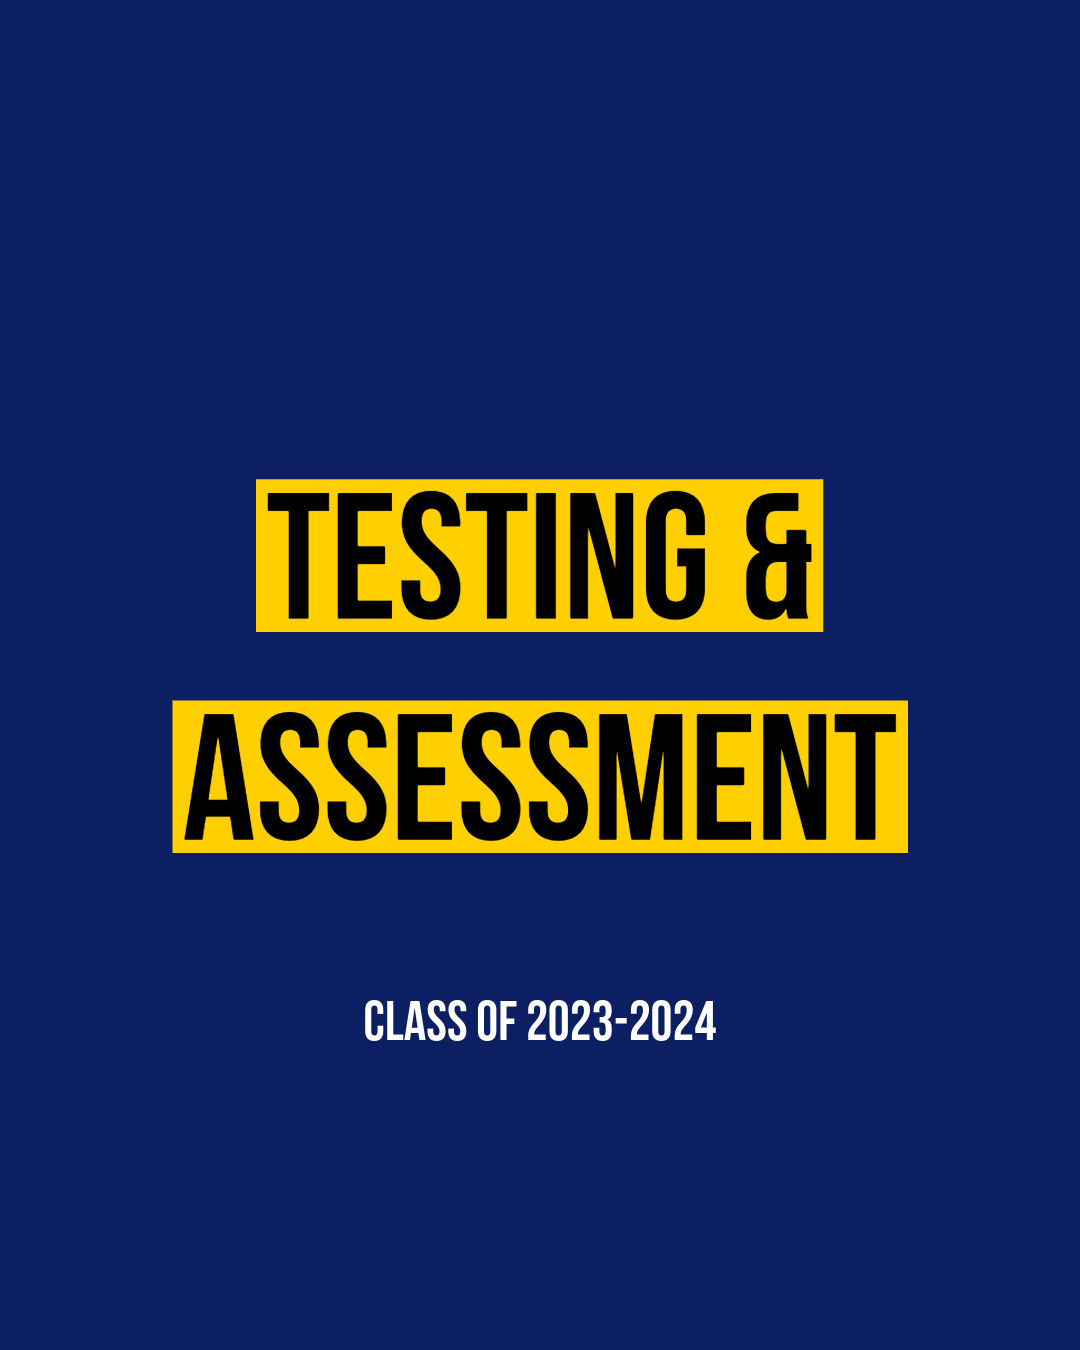 ASSESSMENT AND TESTING 